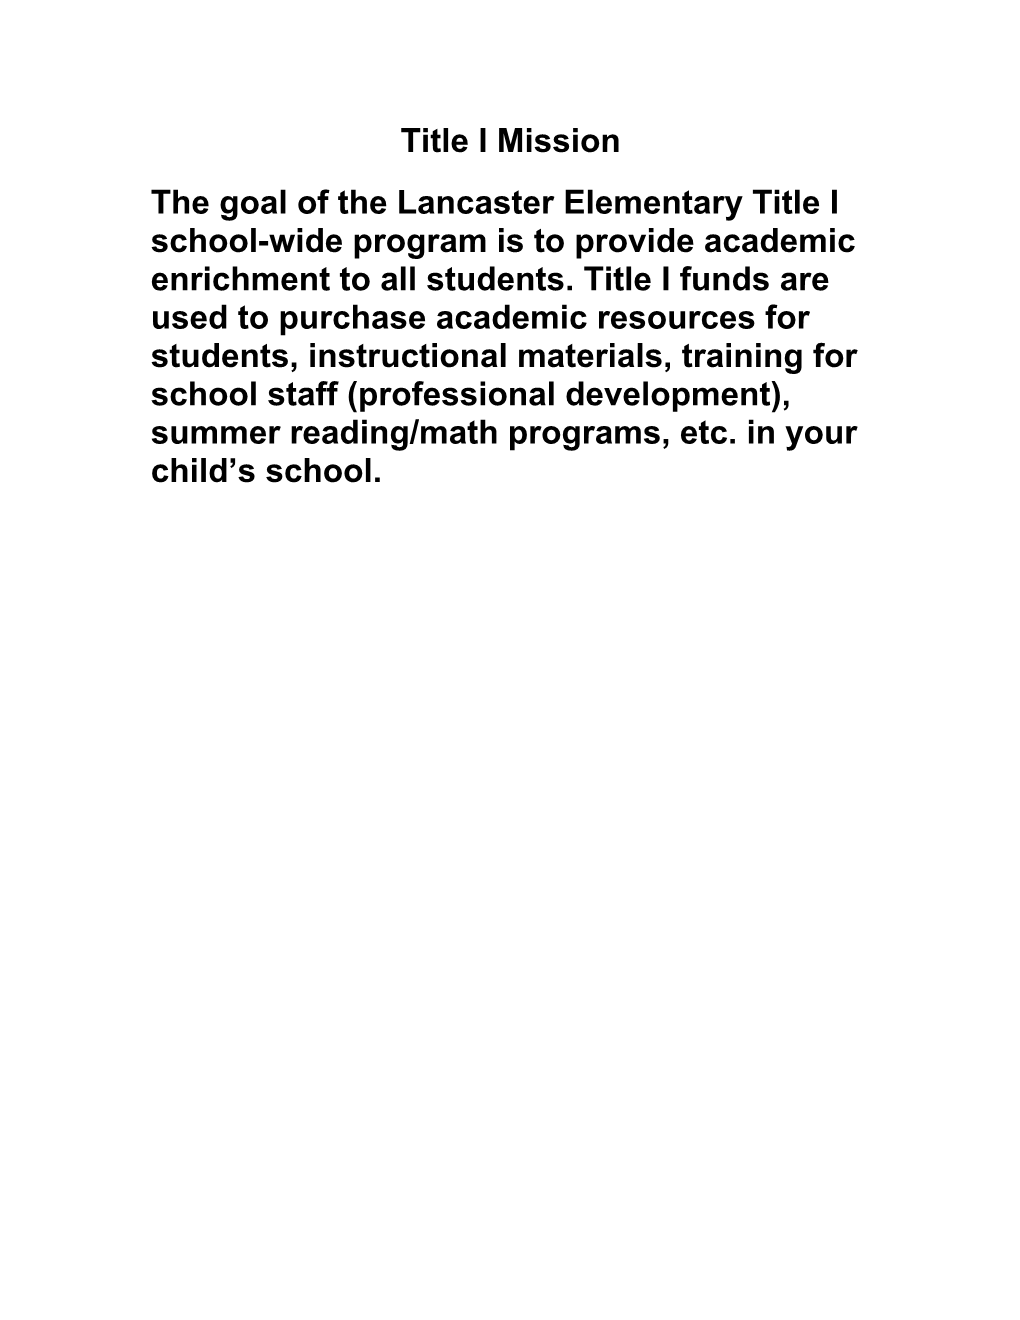 The Goal of the Lancaster Elementary Title I School-Wide Program Is to Provide Academic